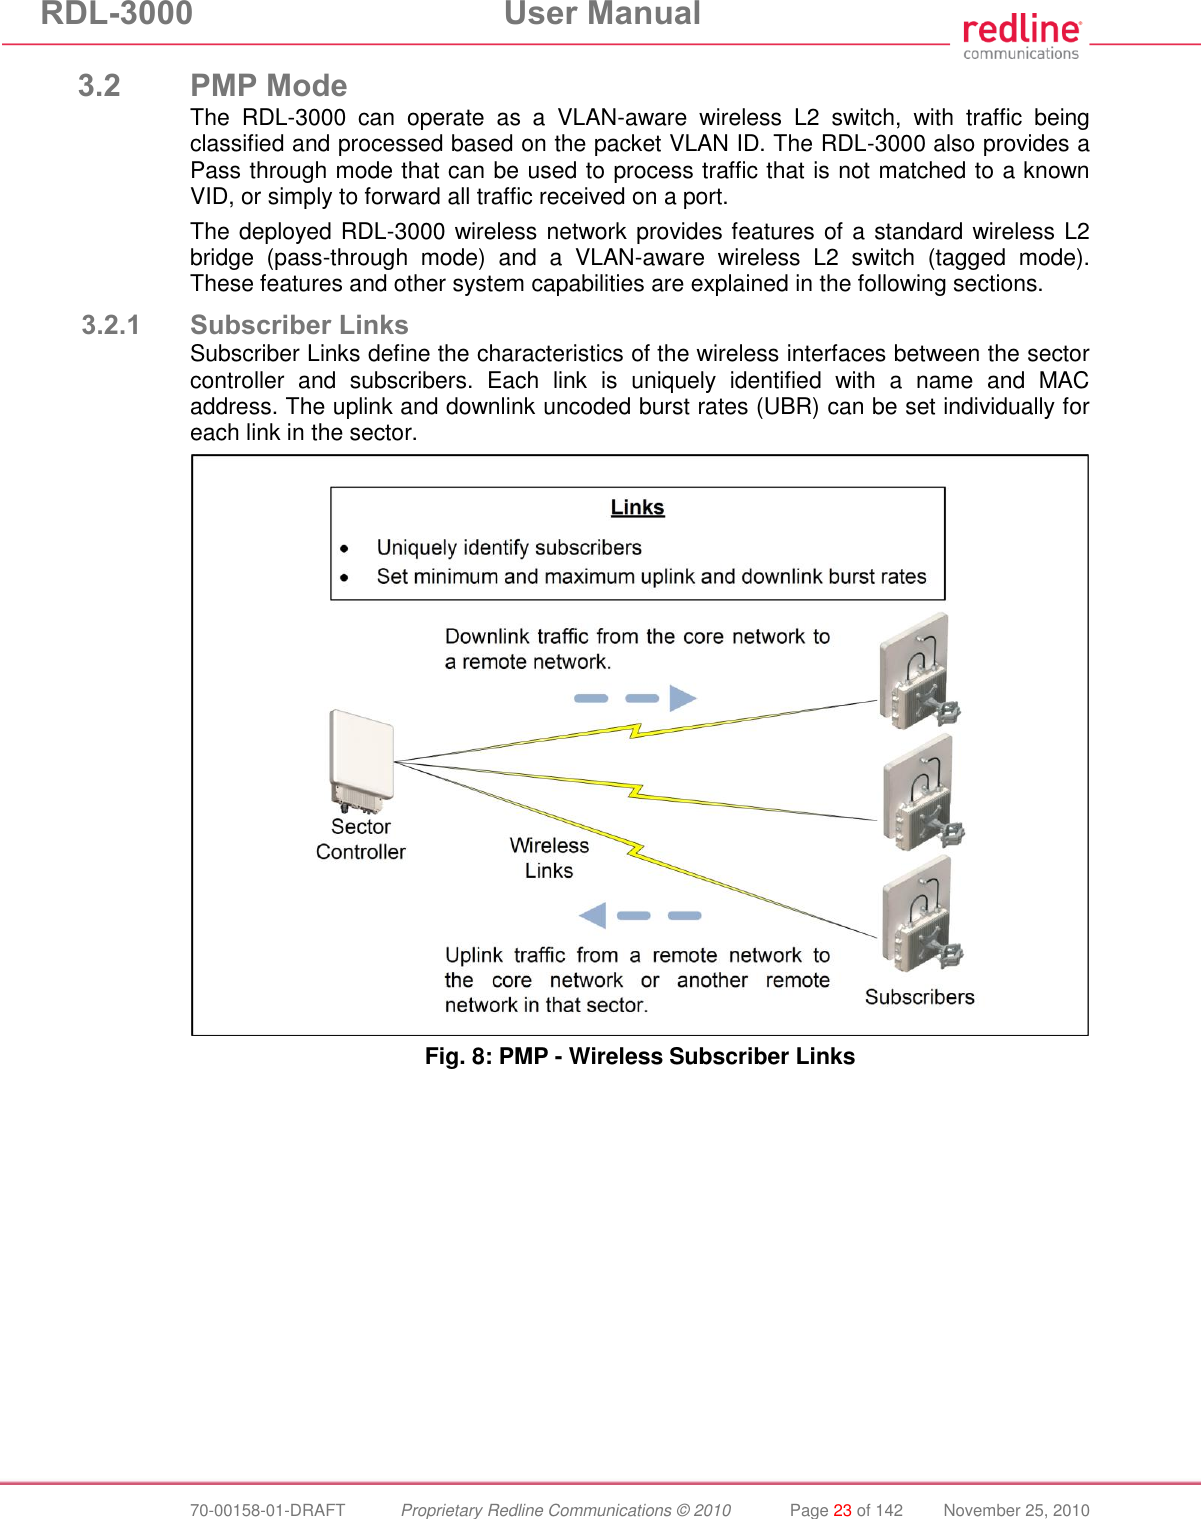 RDL-3000  User Manual  70-00158-01-DRAFT  Proprietary Redline Communications © 2010  Page 23 of 142  November 25, 2010 3.2 PMP Mode The  RDL-3000  can  operate  as  a  VLAN-aware  wireless  L2  switch,  with  traffic  being classified and processed based on the packet VLAN ID. The RDL-3000 also provides a Pass through mode that can be used to process traffic that is not matched to a known VID, or simply to forward all traffic received on a port.  The deployed RDL-3000 wireless network provides features of a standard wireless L2 bridge  (pass-through  mode)  and  a  VLAN-aware  wireless  L2  switch  (tagged  mode). These features and other system capabilities are explained in the following sections. 3.2.1 Subscriber Links Subscriber Links define the characteristics of the wireless interfaces between the sector controller  and  subscribers.  Each  link  is  uniquely  identified  with  a  name  and  MAC address. The uplink and downlink uncoded burst rates (UBR) can be set individually for each link in the sector.  Fig. 8: PMP - Wireless Subscriber Links 